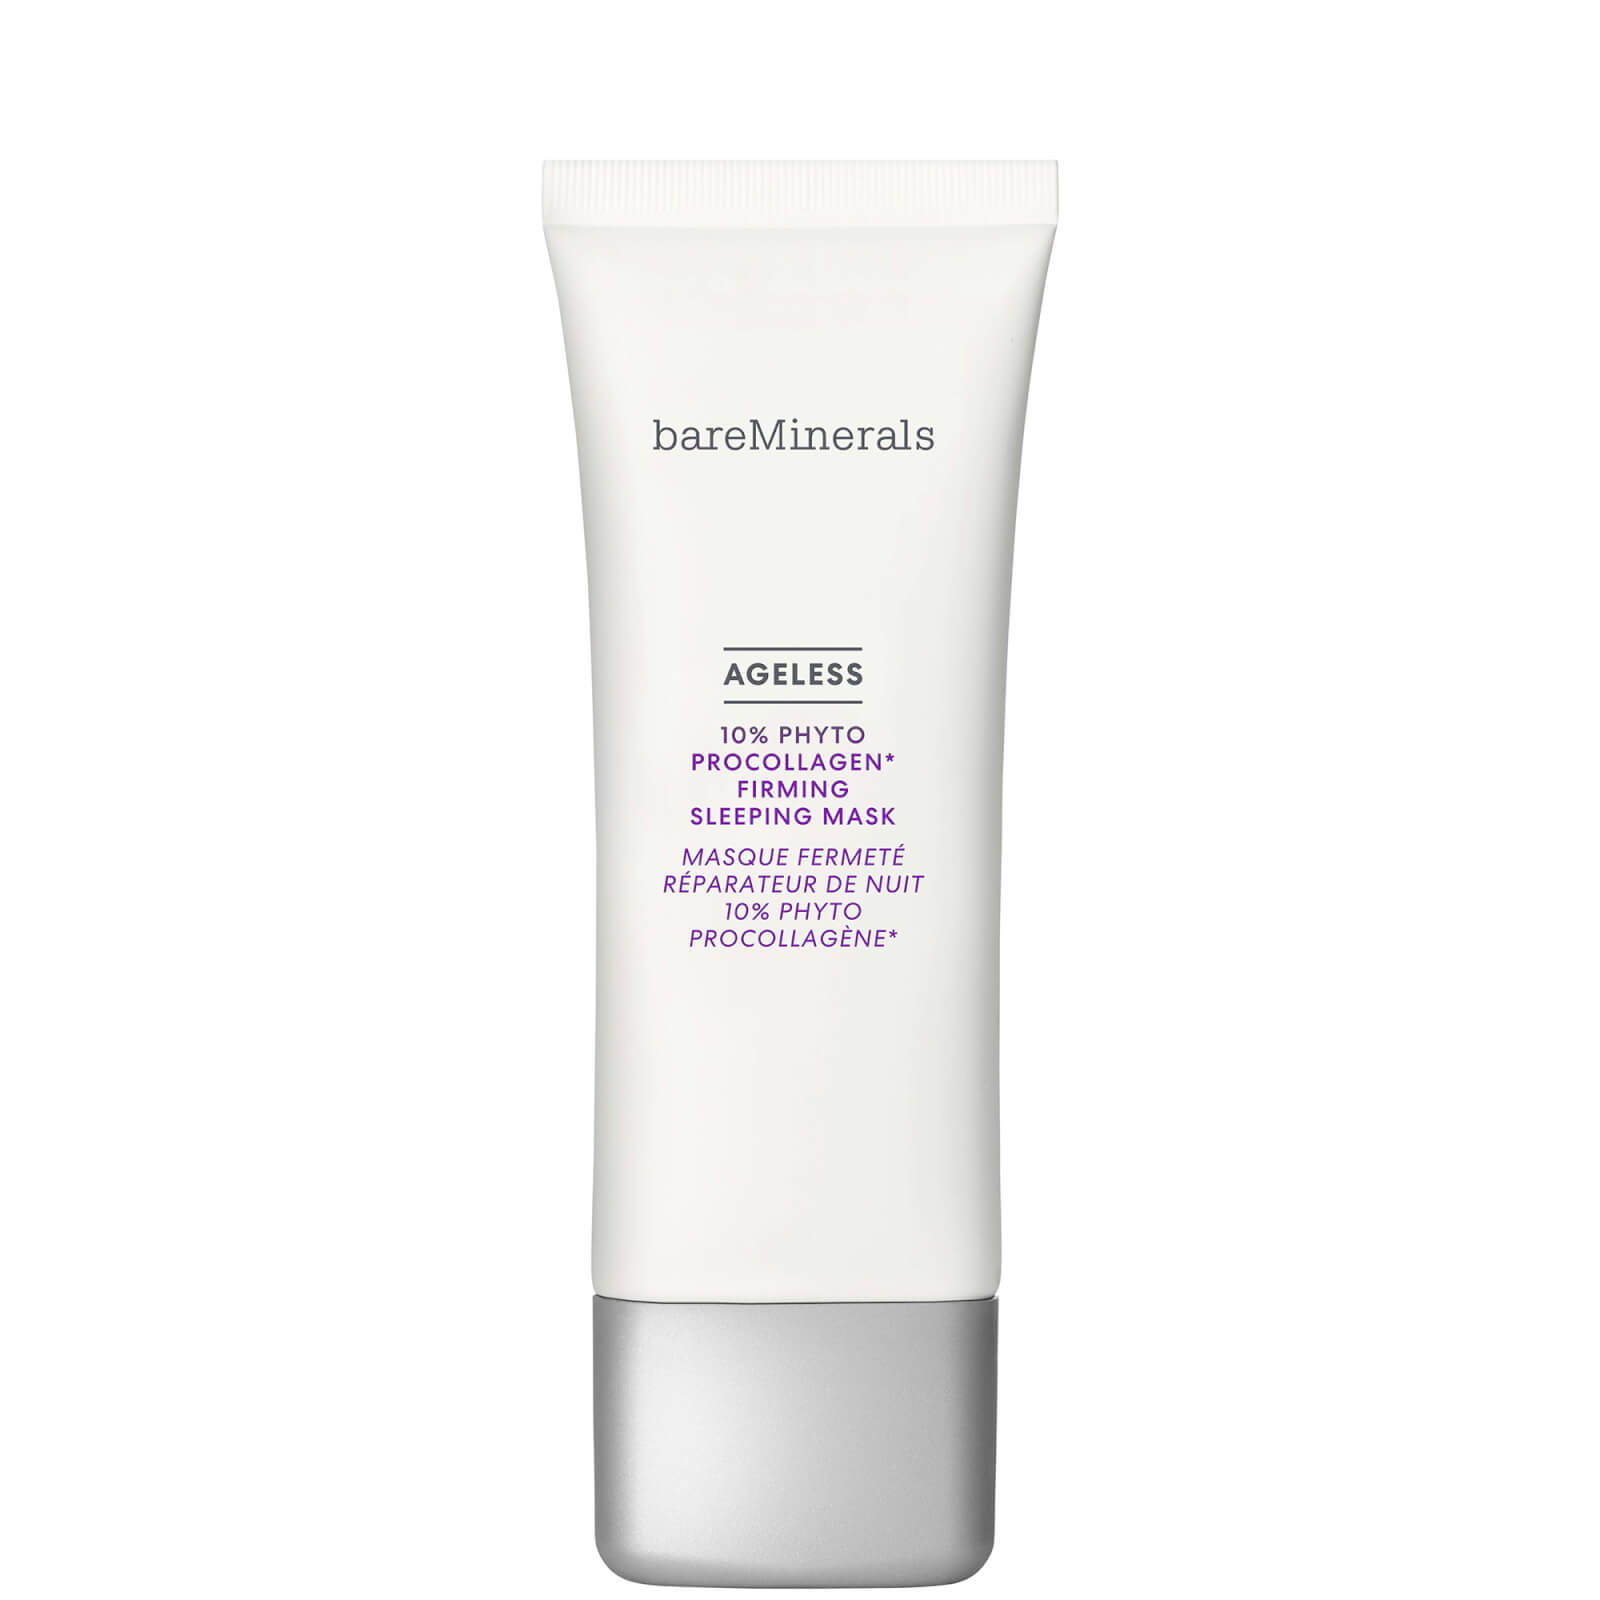 Image of bareMinerals Ageless Phyto Procollagen Instant Firming Sleeping Mask 75ml